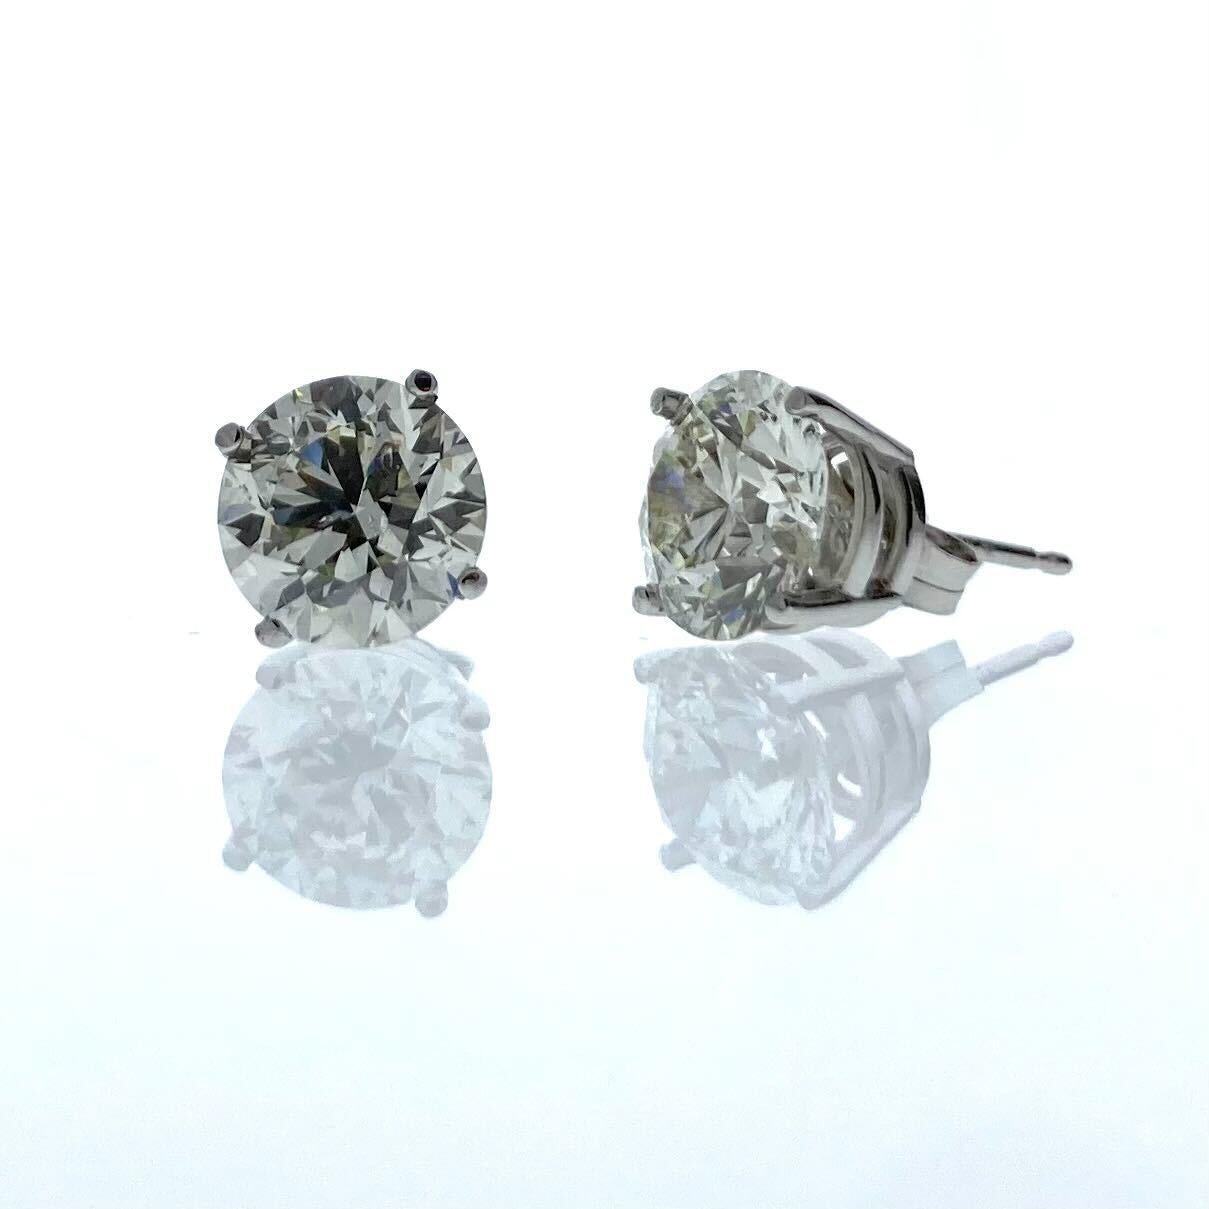 Round Cut 4.59 Total Carat Weight EGL Certified Round Diamond Studs In 14k White Gold For Sale